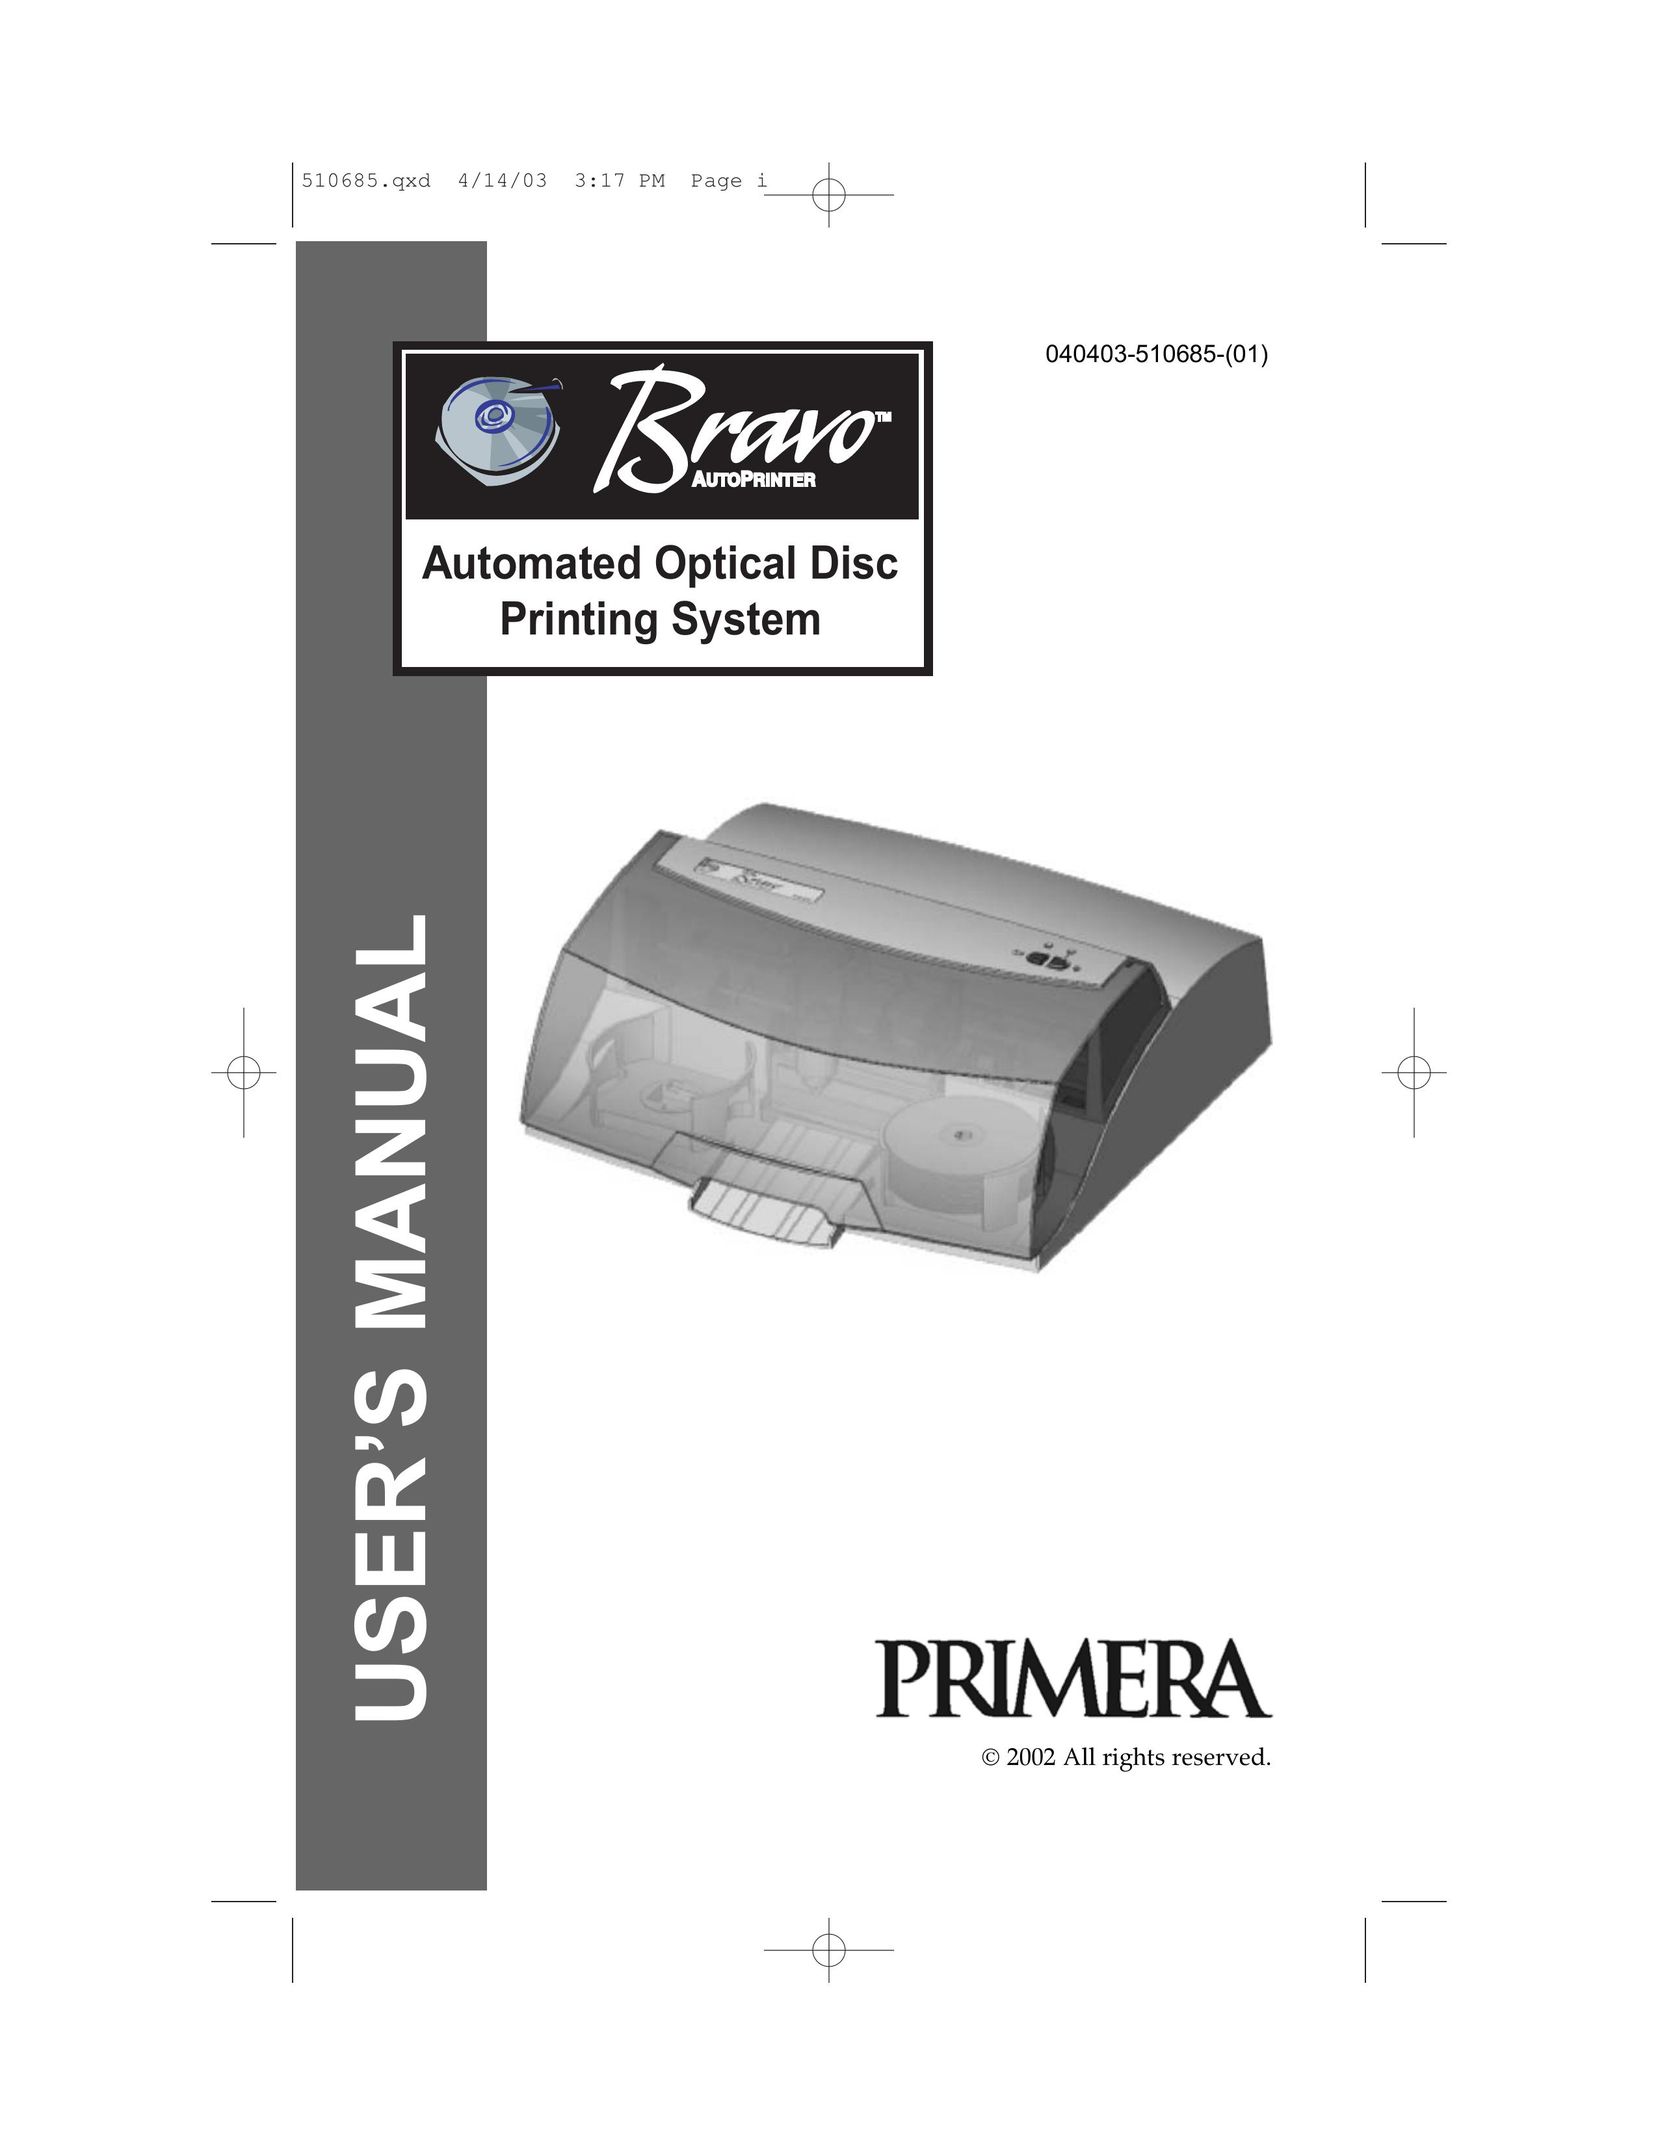 Primera Technology Automated Optical Disc Printing System Printer User Manual